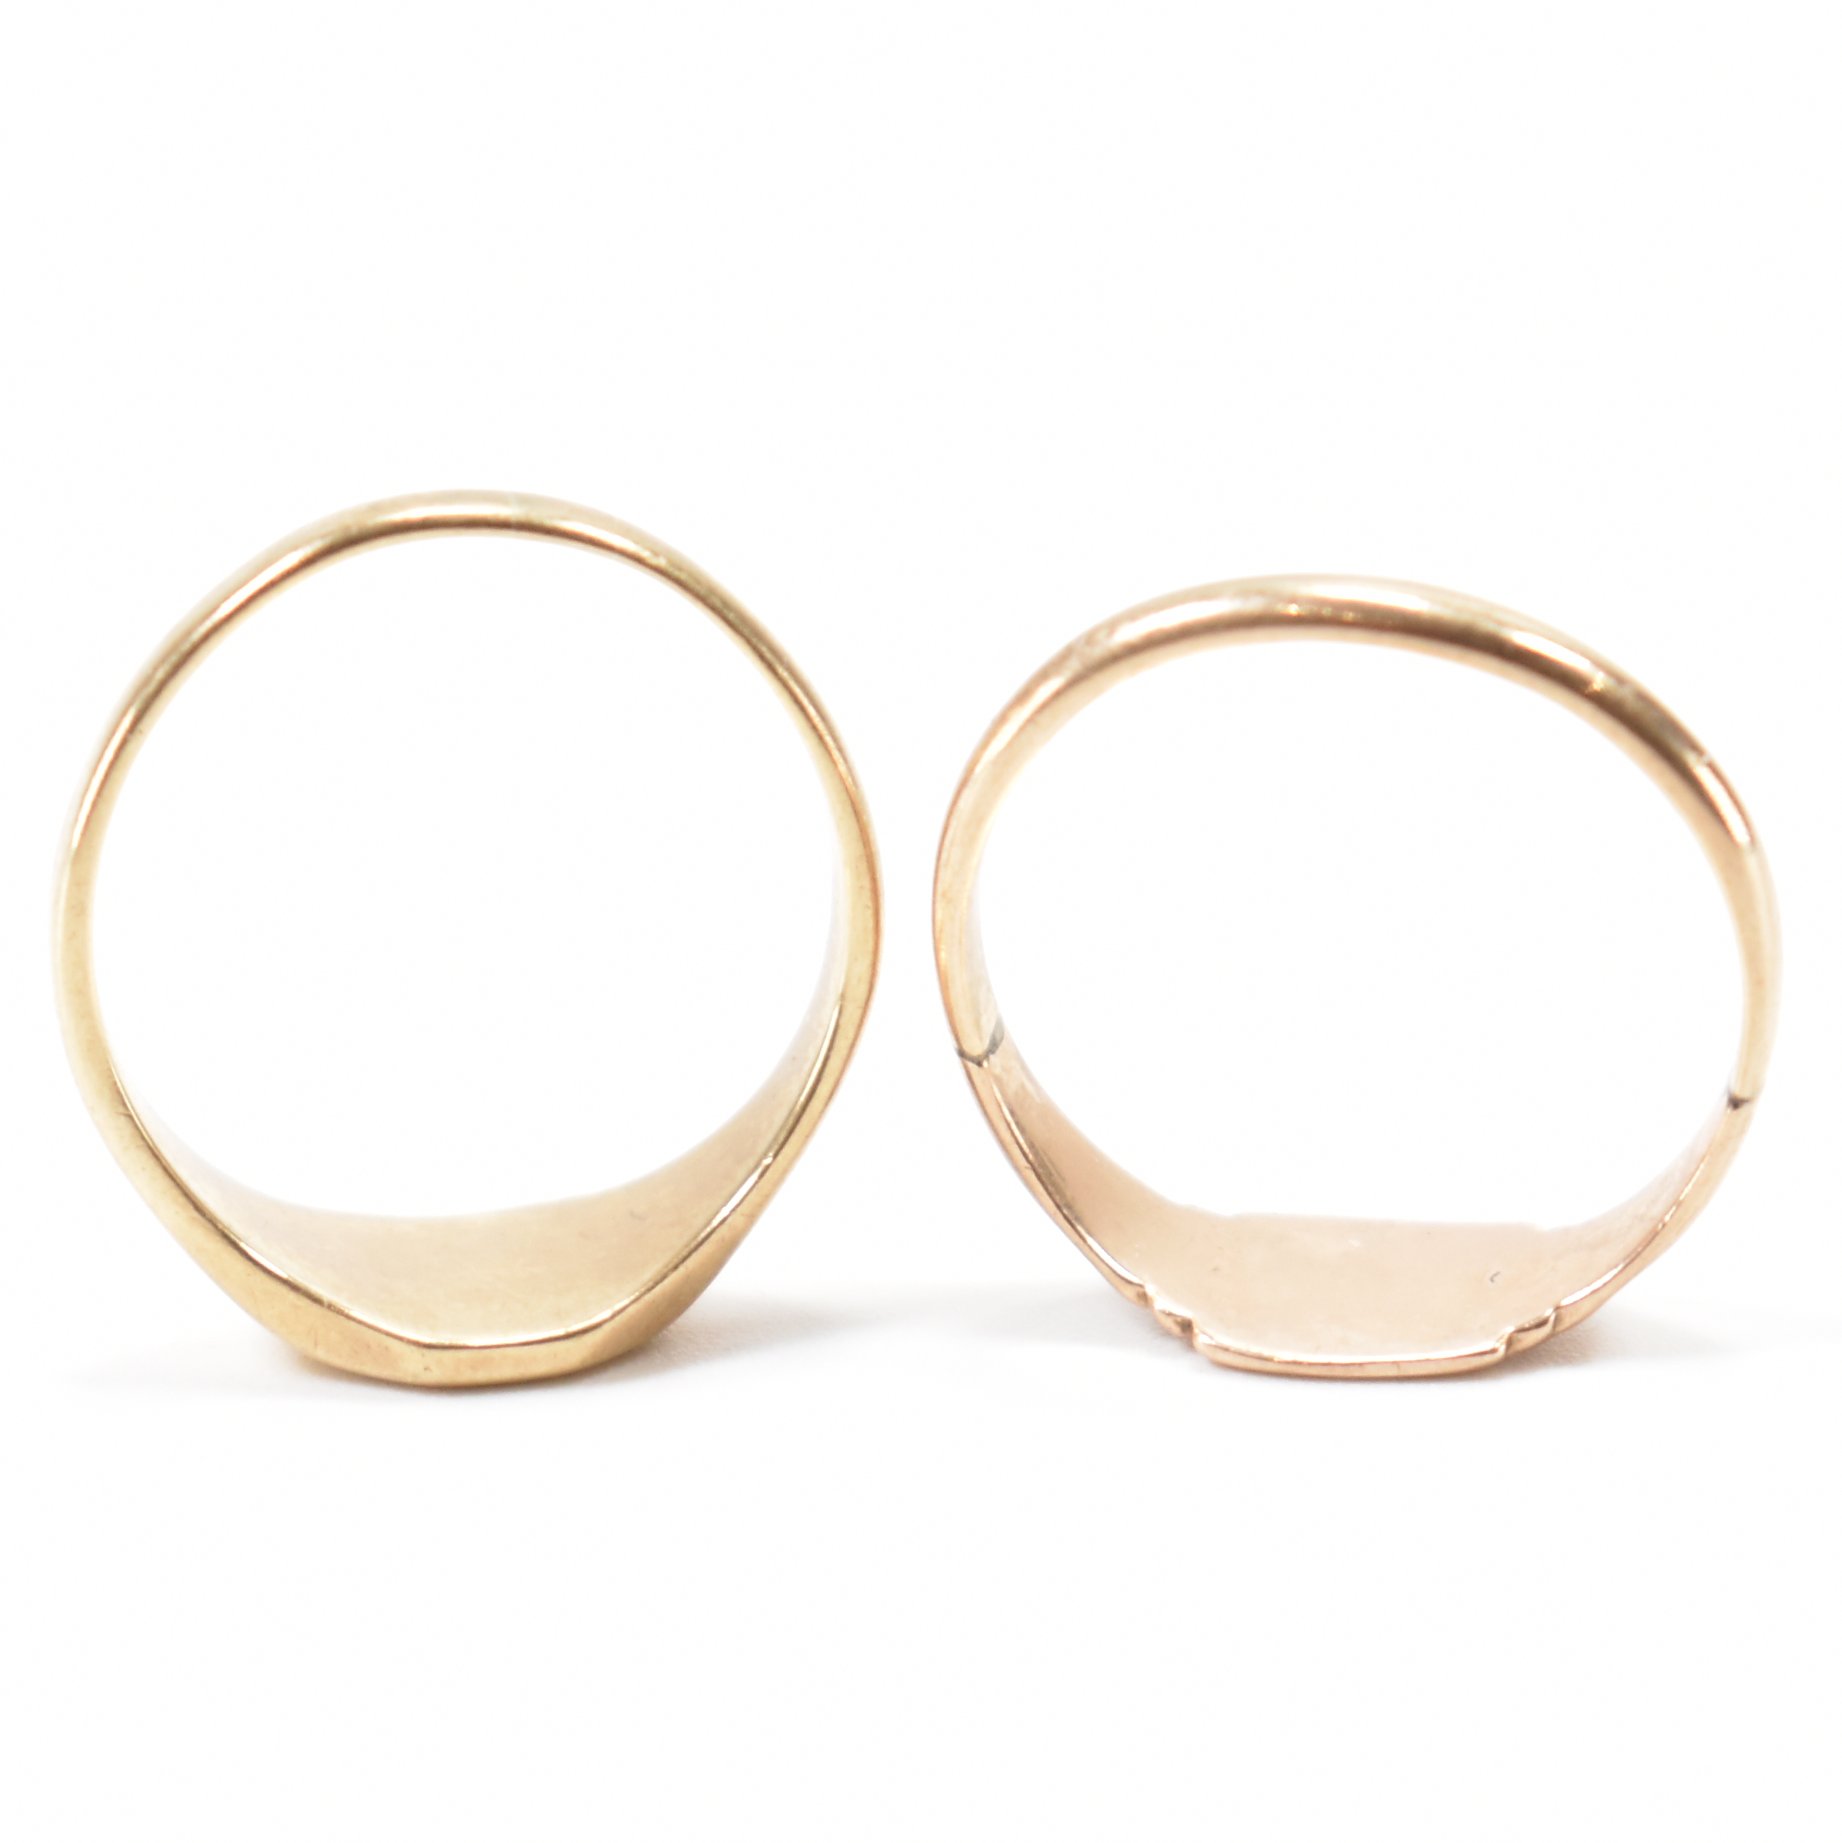 TWO 9CT GOLD SIGNET RINGS - Image 6 of 7